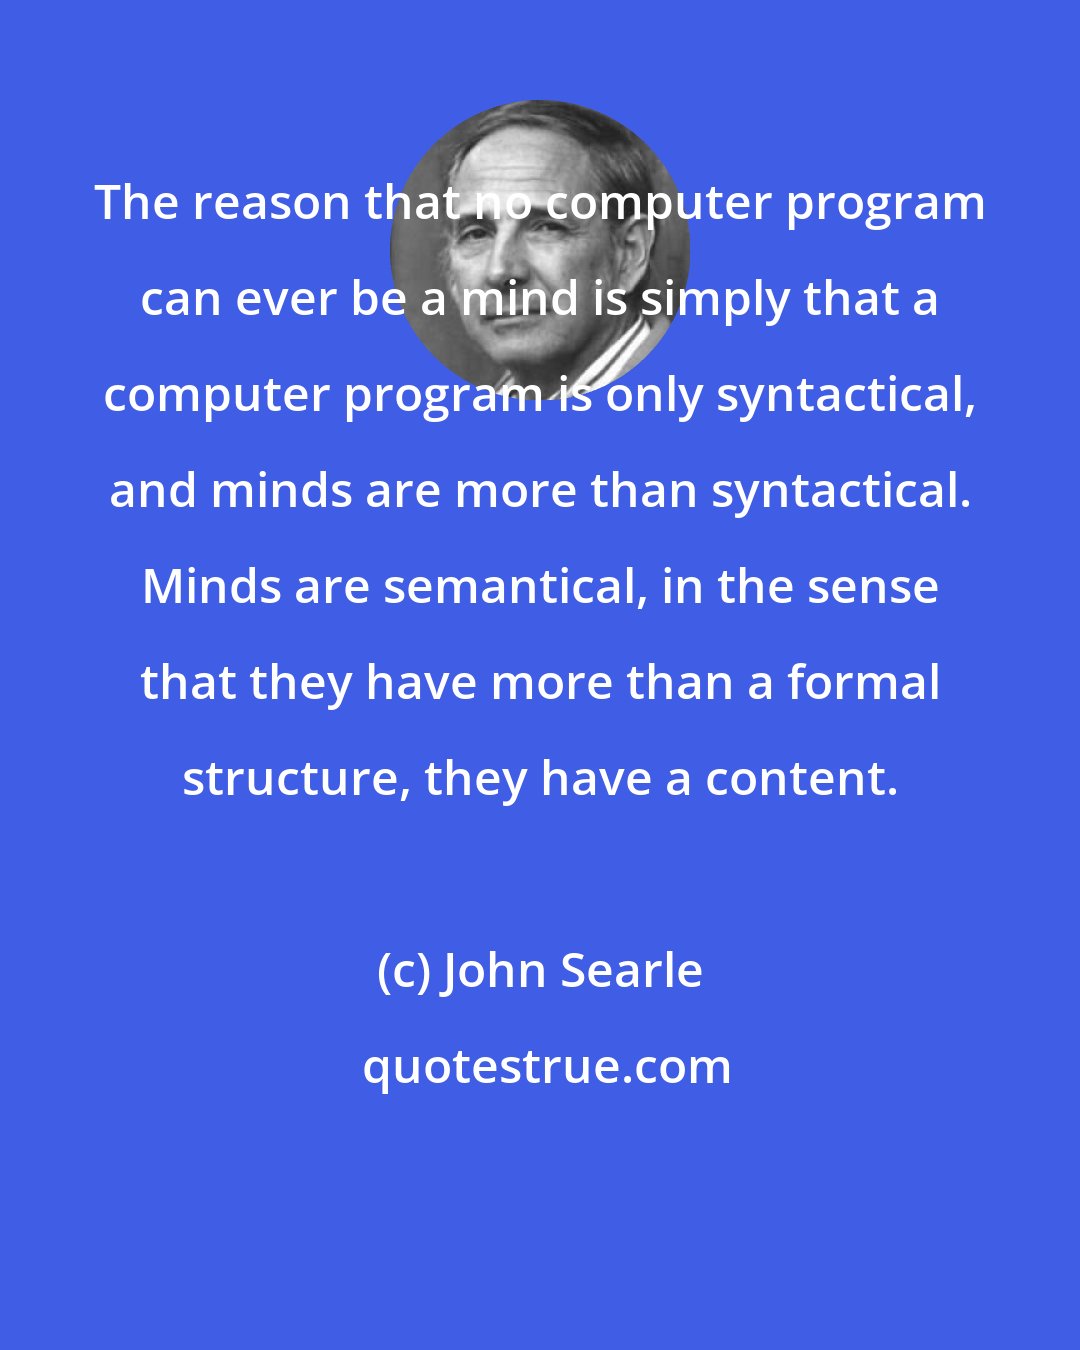 John Searle: The reason that no computer program can ever be a mind is simply that a computer program is only syntactical, and minds are more than syntactical. Minds are semantical, in the sense that they have more than a formal structure, they have a content.